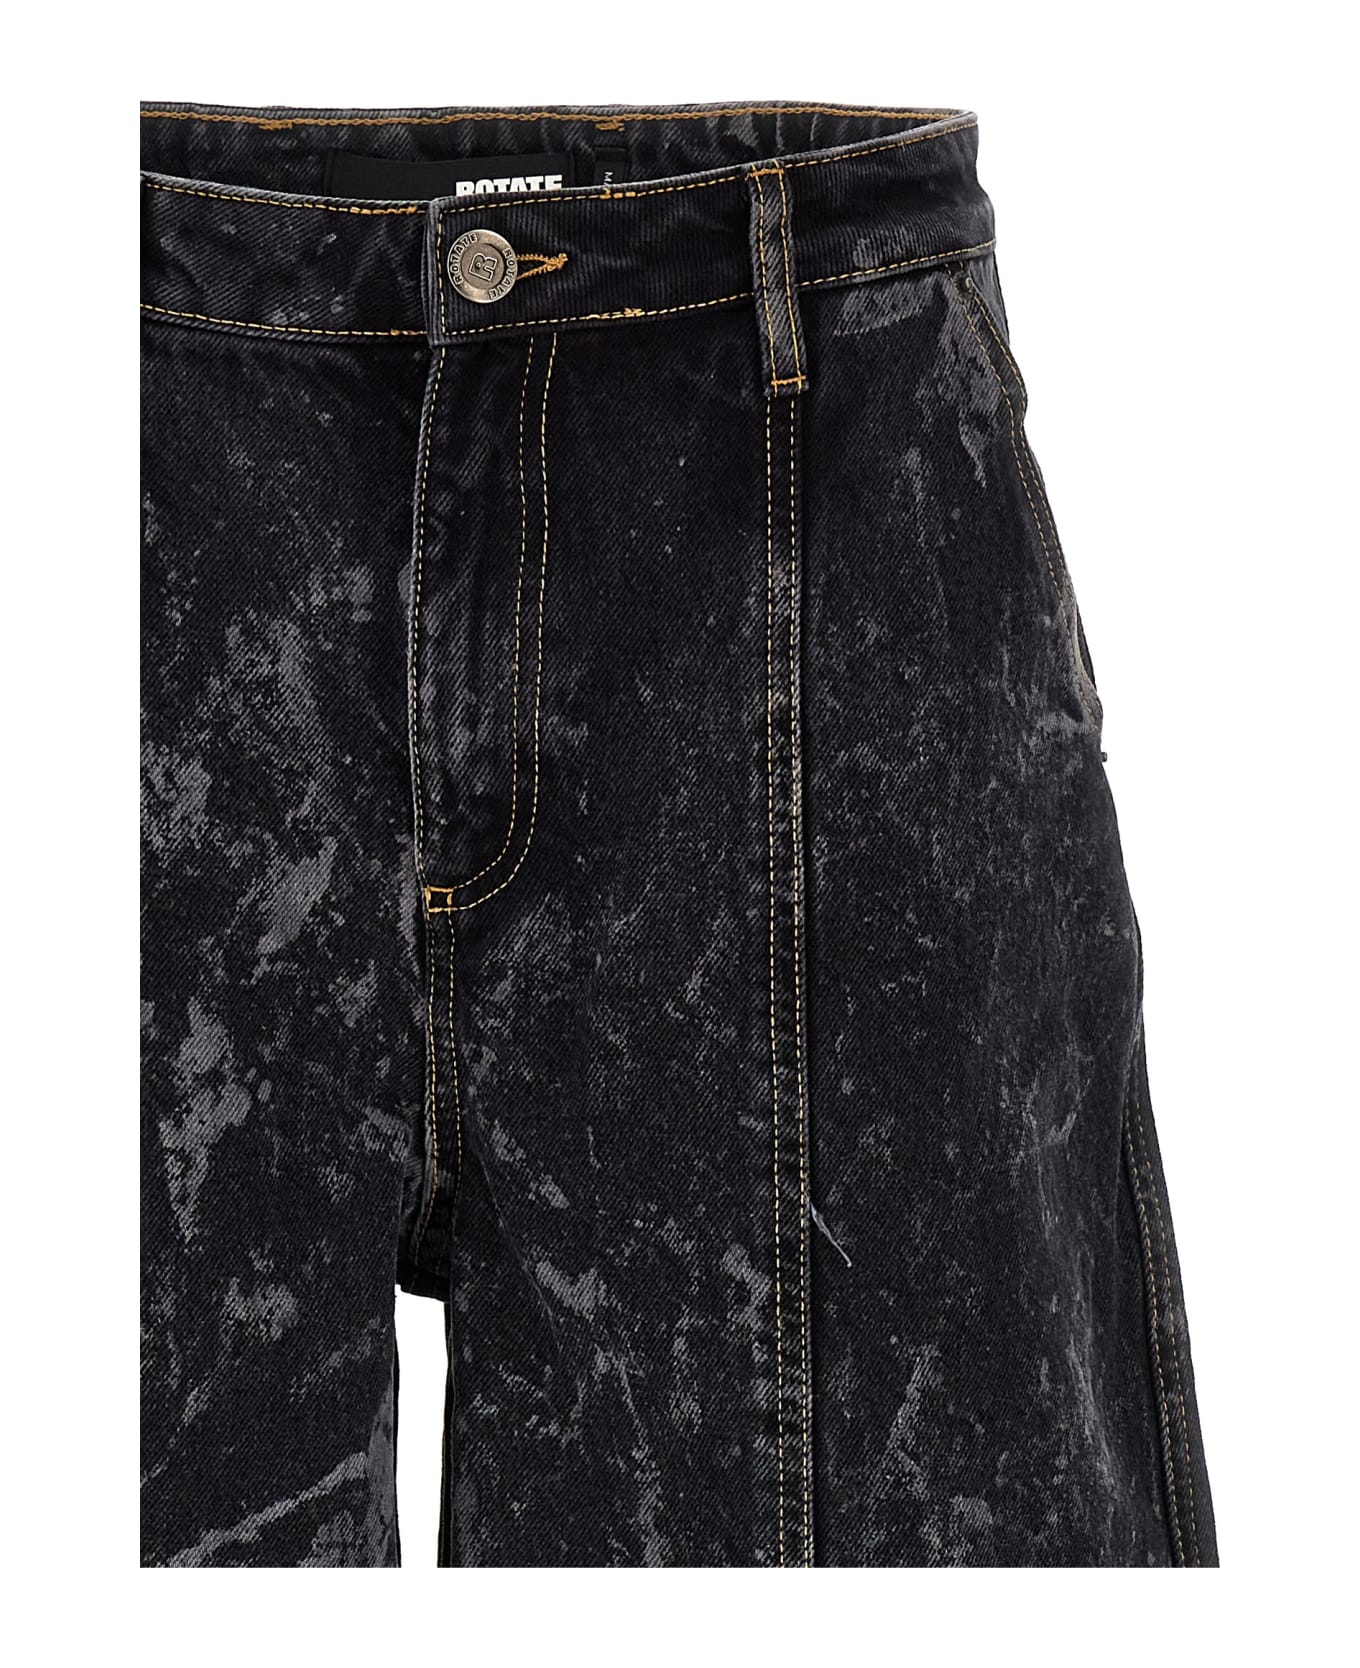 Rotate by Birger Christensen 'washed Twill Wide' Jeans - Black  